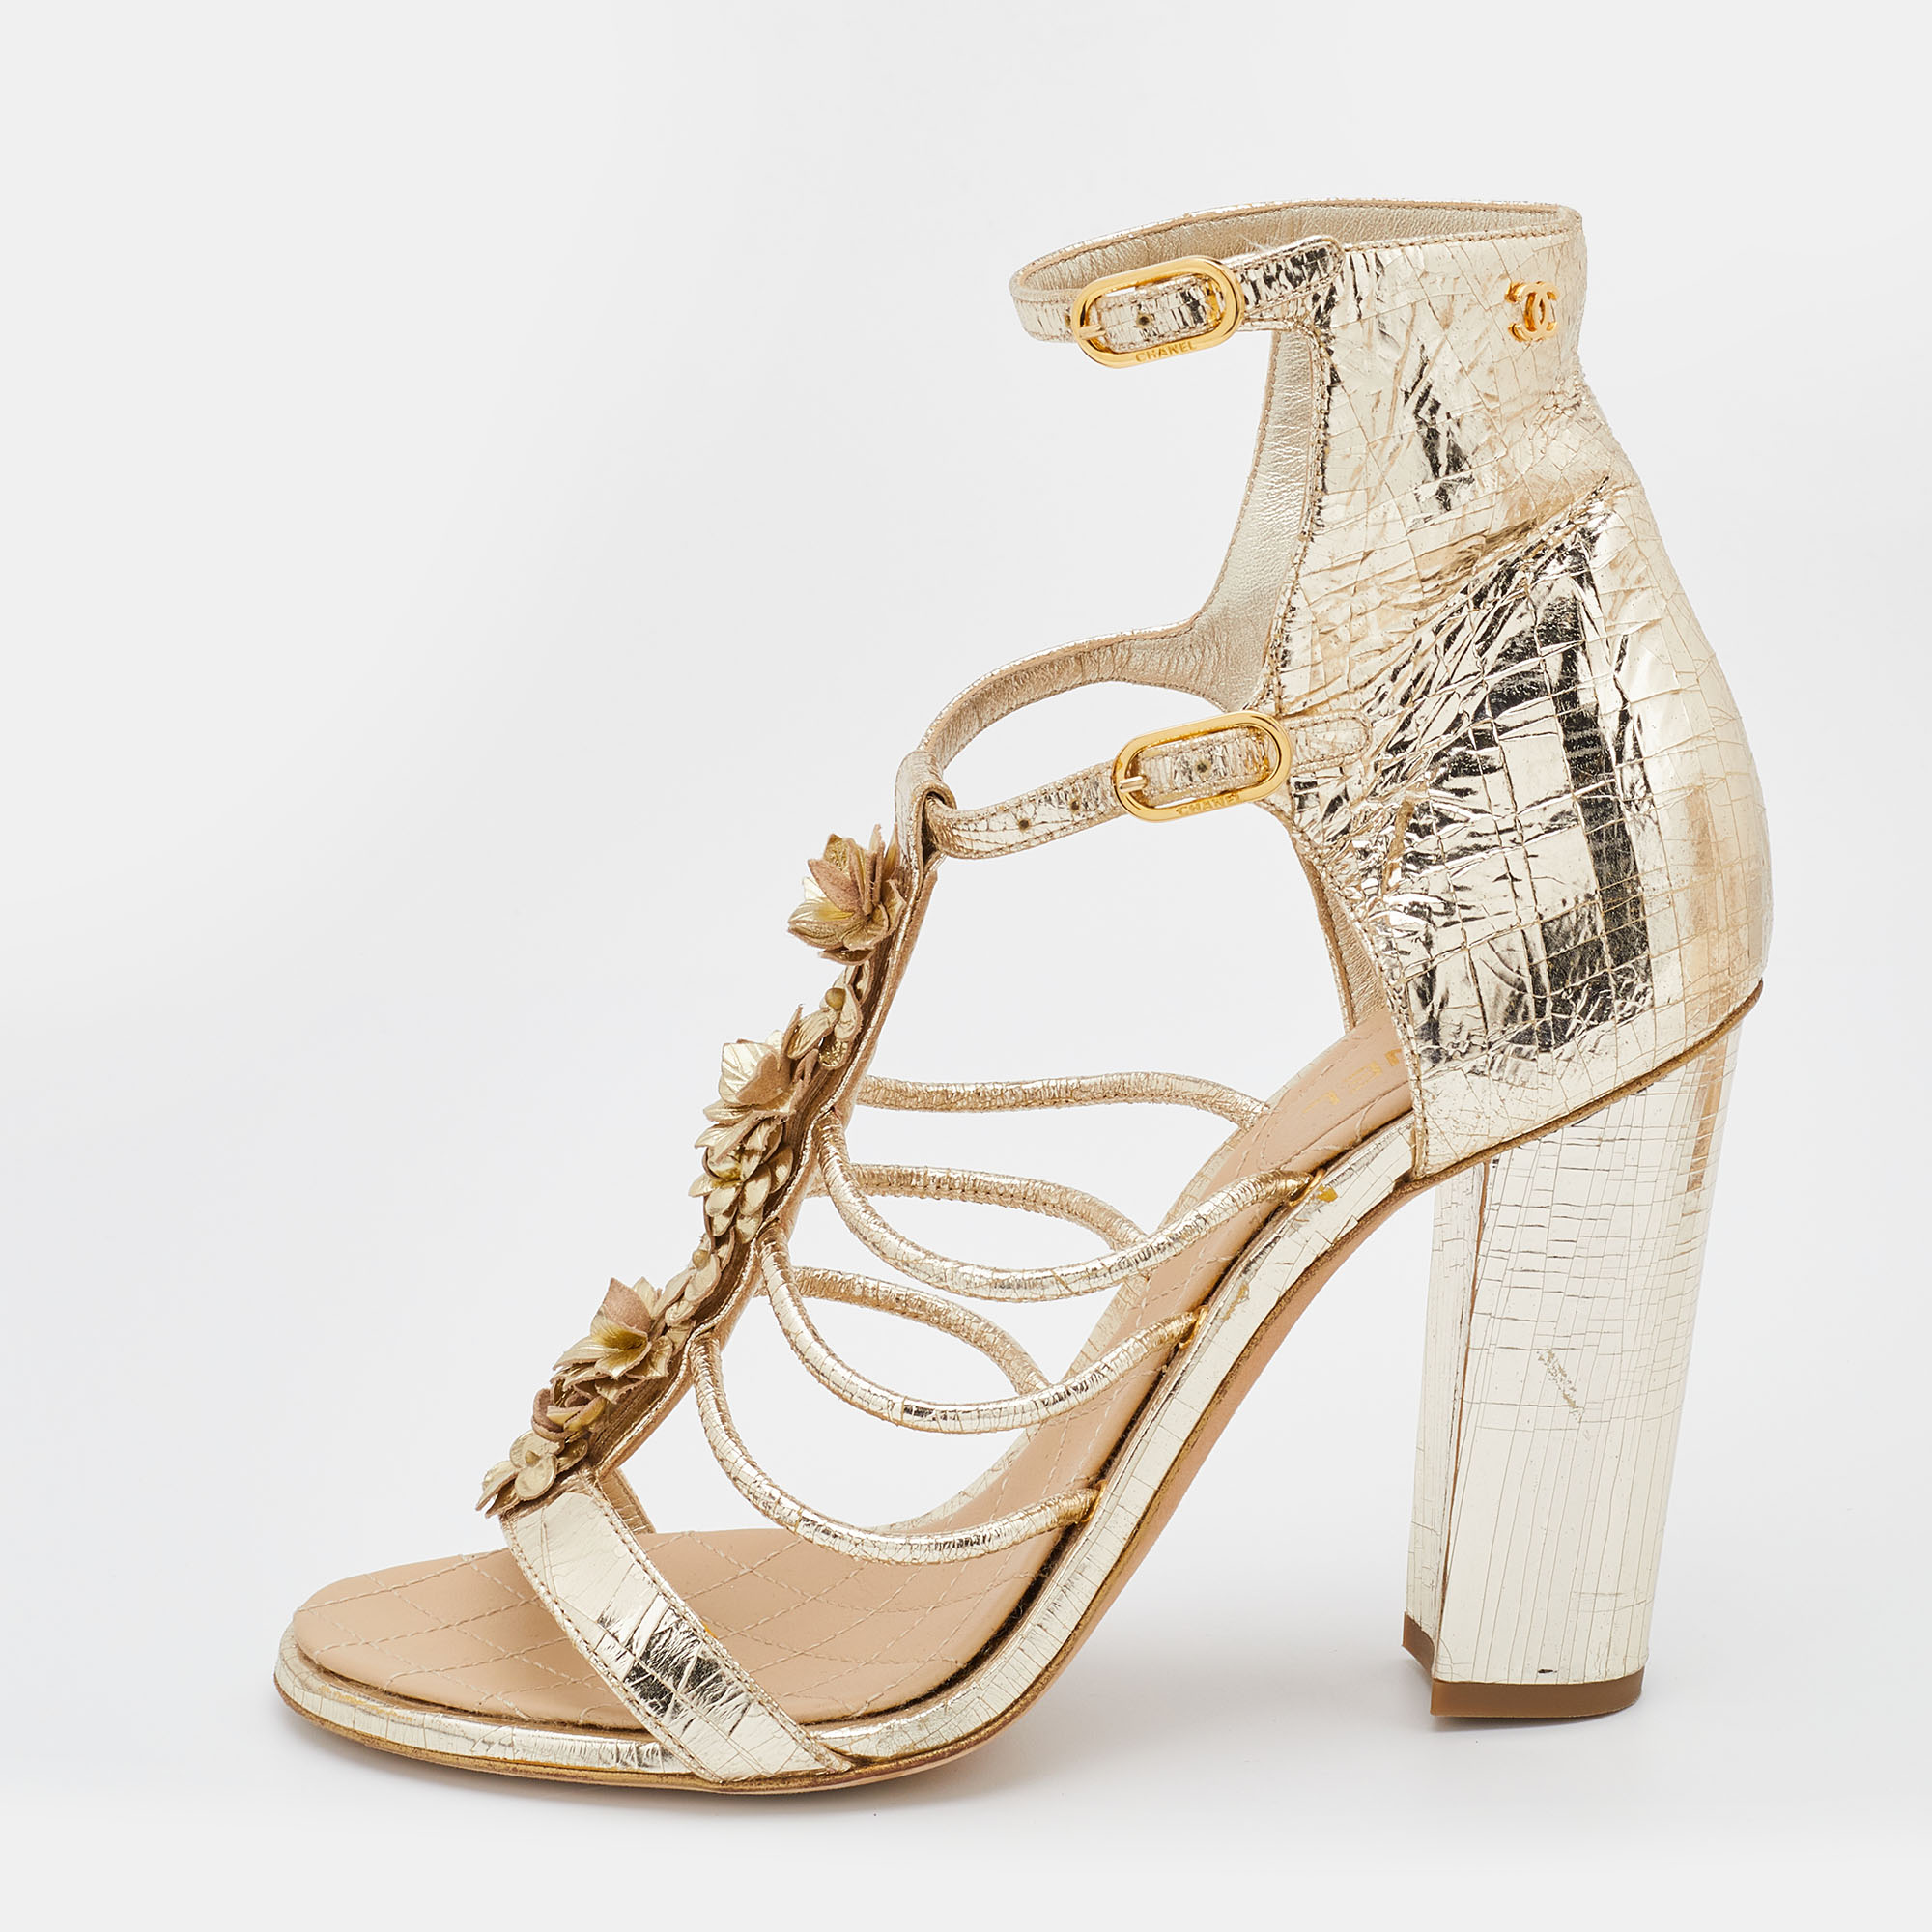 Chanel Metallic Gold Textured Leather Camellia Ankle Strap Sandals Size 39.5